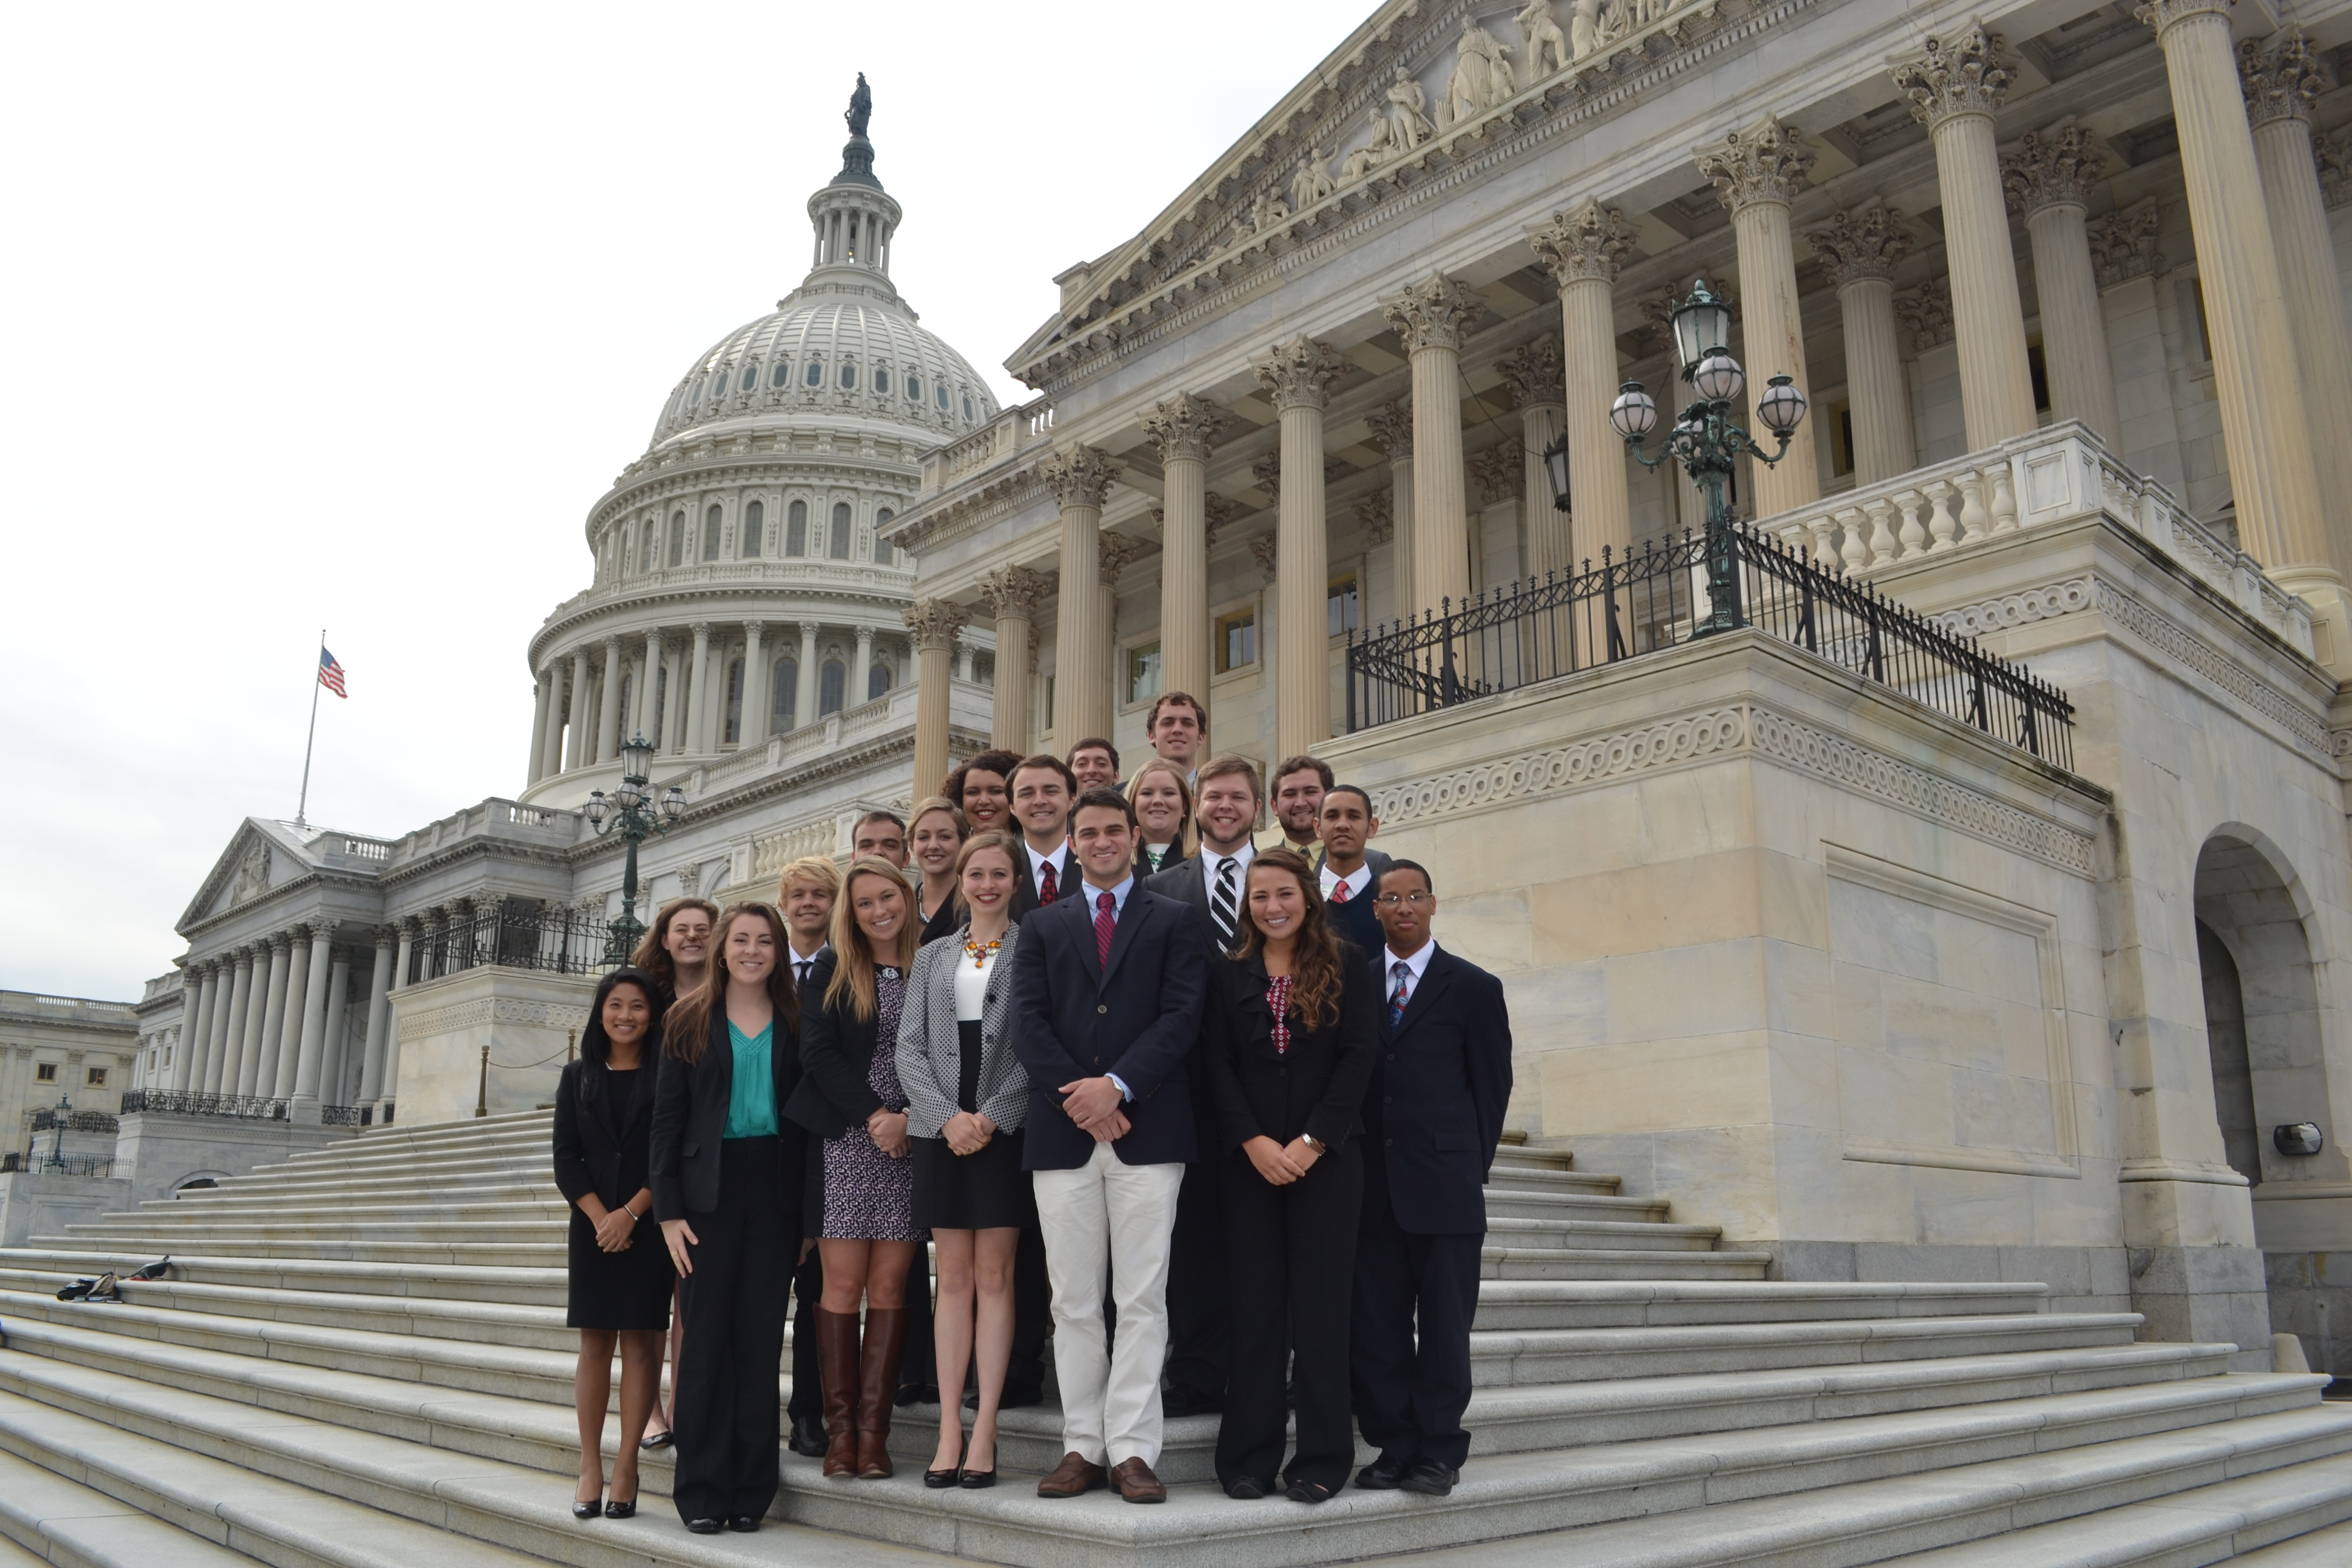 McConnell Scholars elected, appointed to top student leadership positions